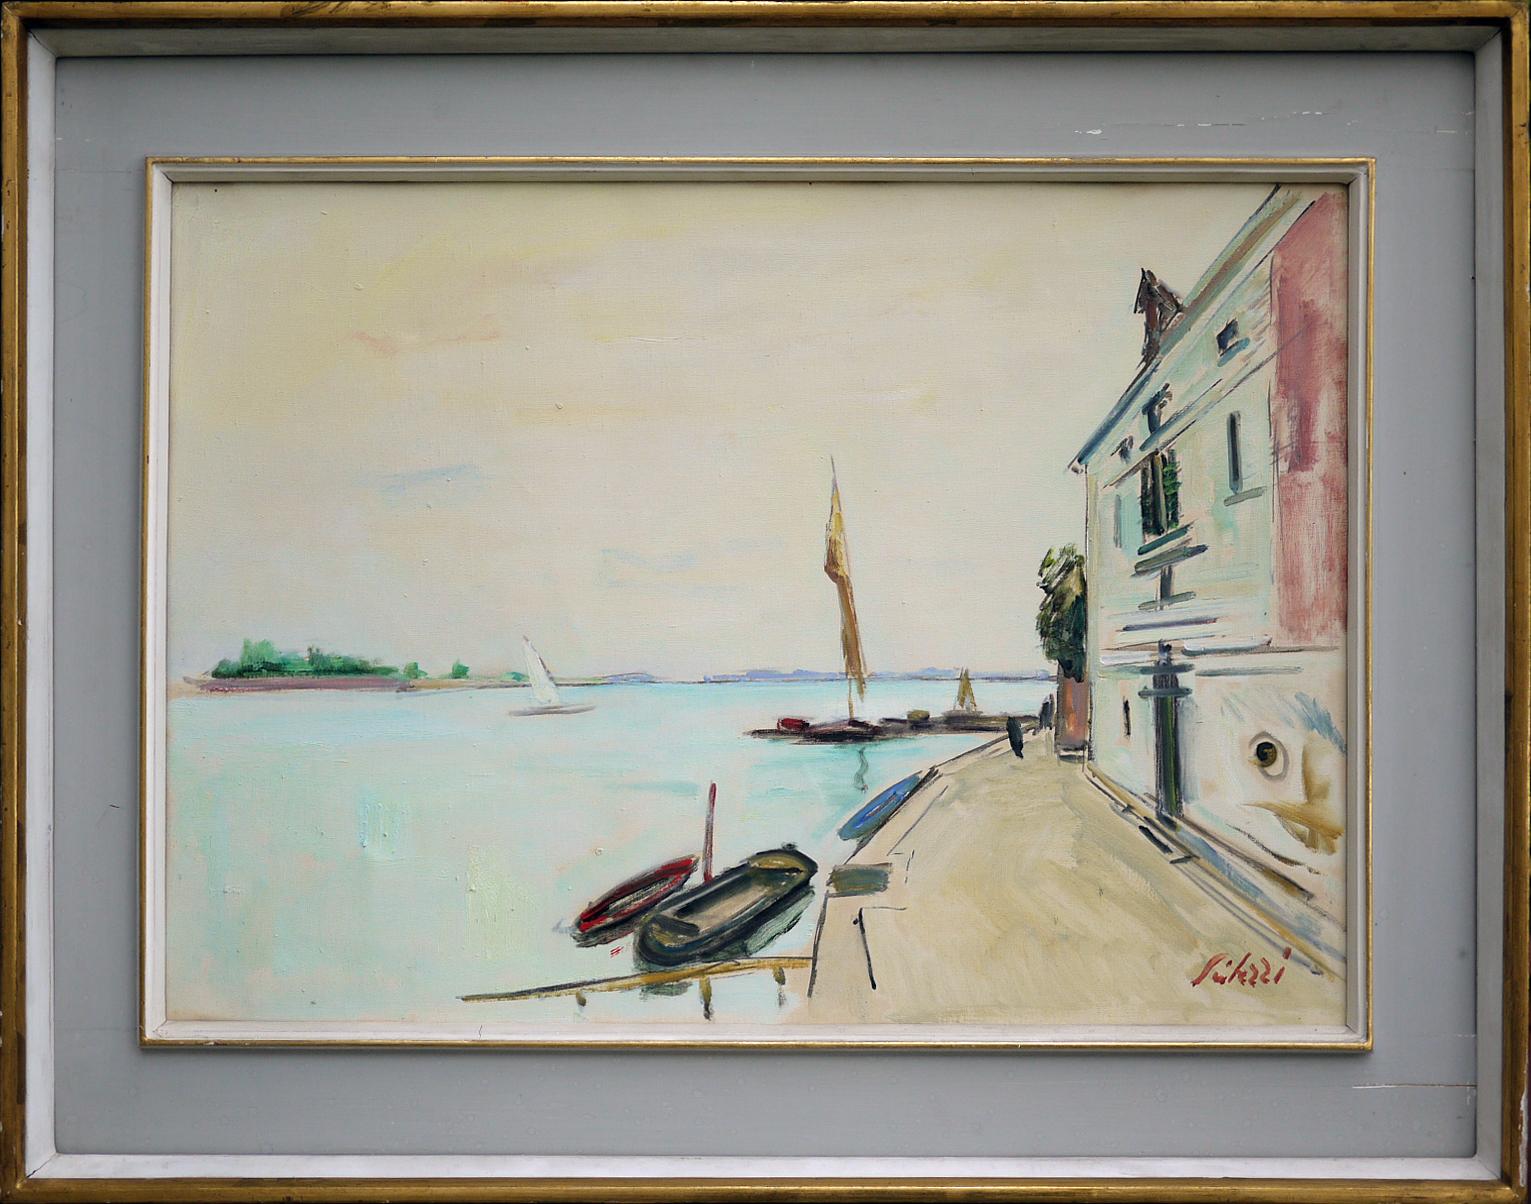 Venice

Measures: 48 cm x 68 cm (without frame) - oil on canvas 
18.9 in x 26.8 in (without frame)
Venice Landscape

Seibezzi Fioravante (Venice, 1906 - 1974)
He trained as a self-taught and adheres to the lagoon post-impressionism of